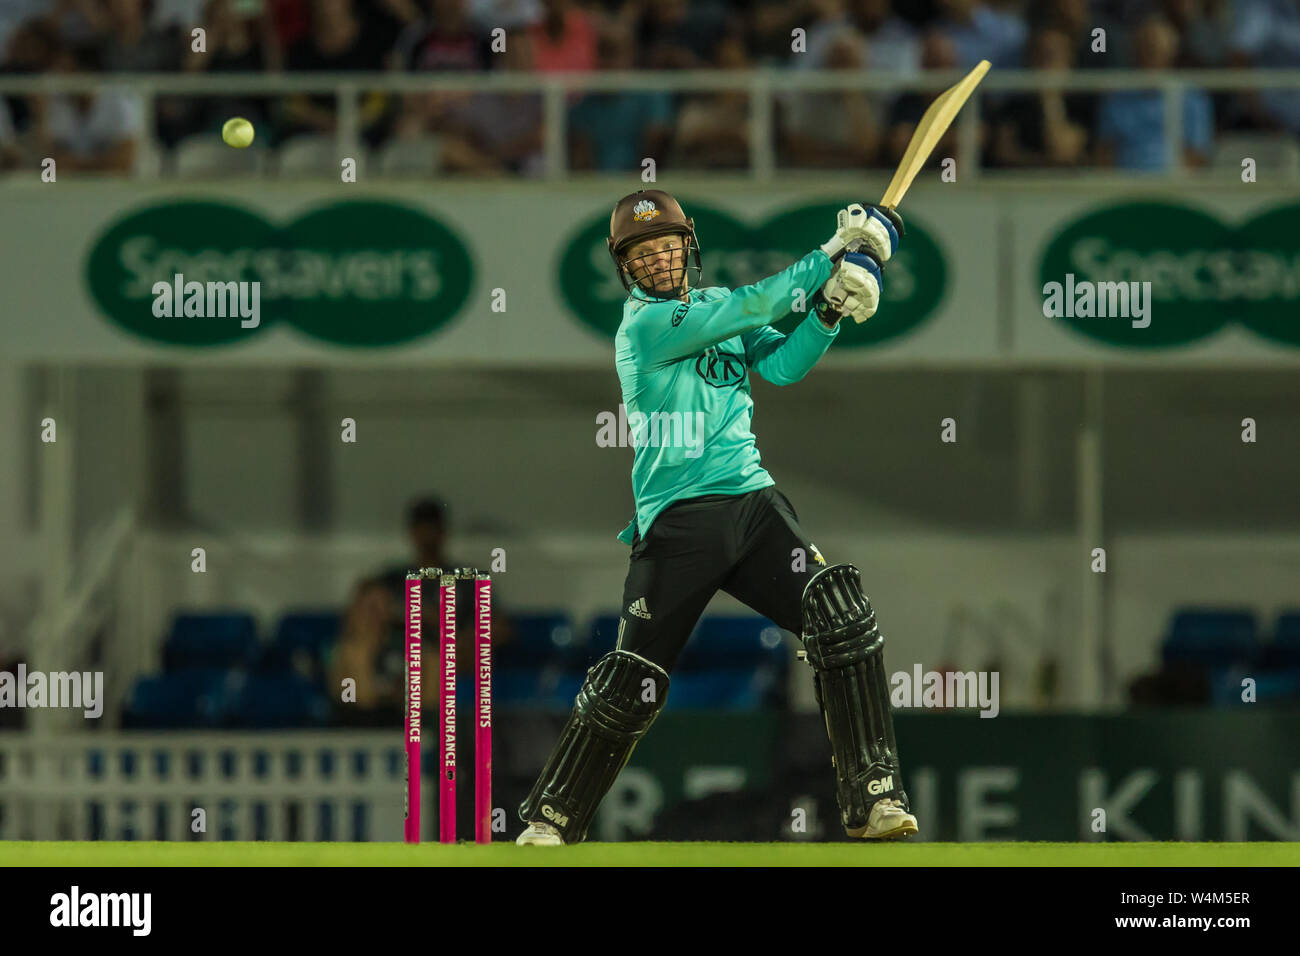 London, UK. 23 July, 2019. Gareth Batty batting for Surrey against Middlesex in the Vitality T20 Blast match at the Kia Oval. David Rowe/Alamy Live News Stock Photo